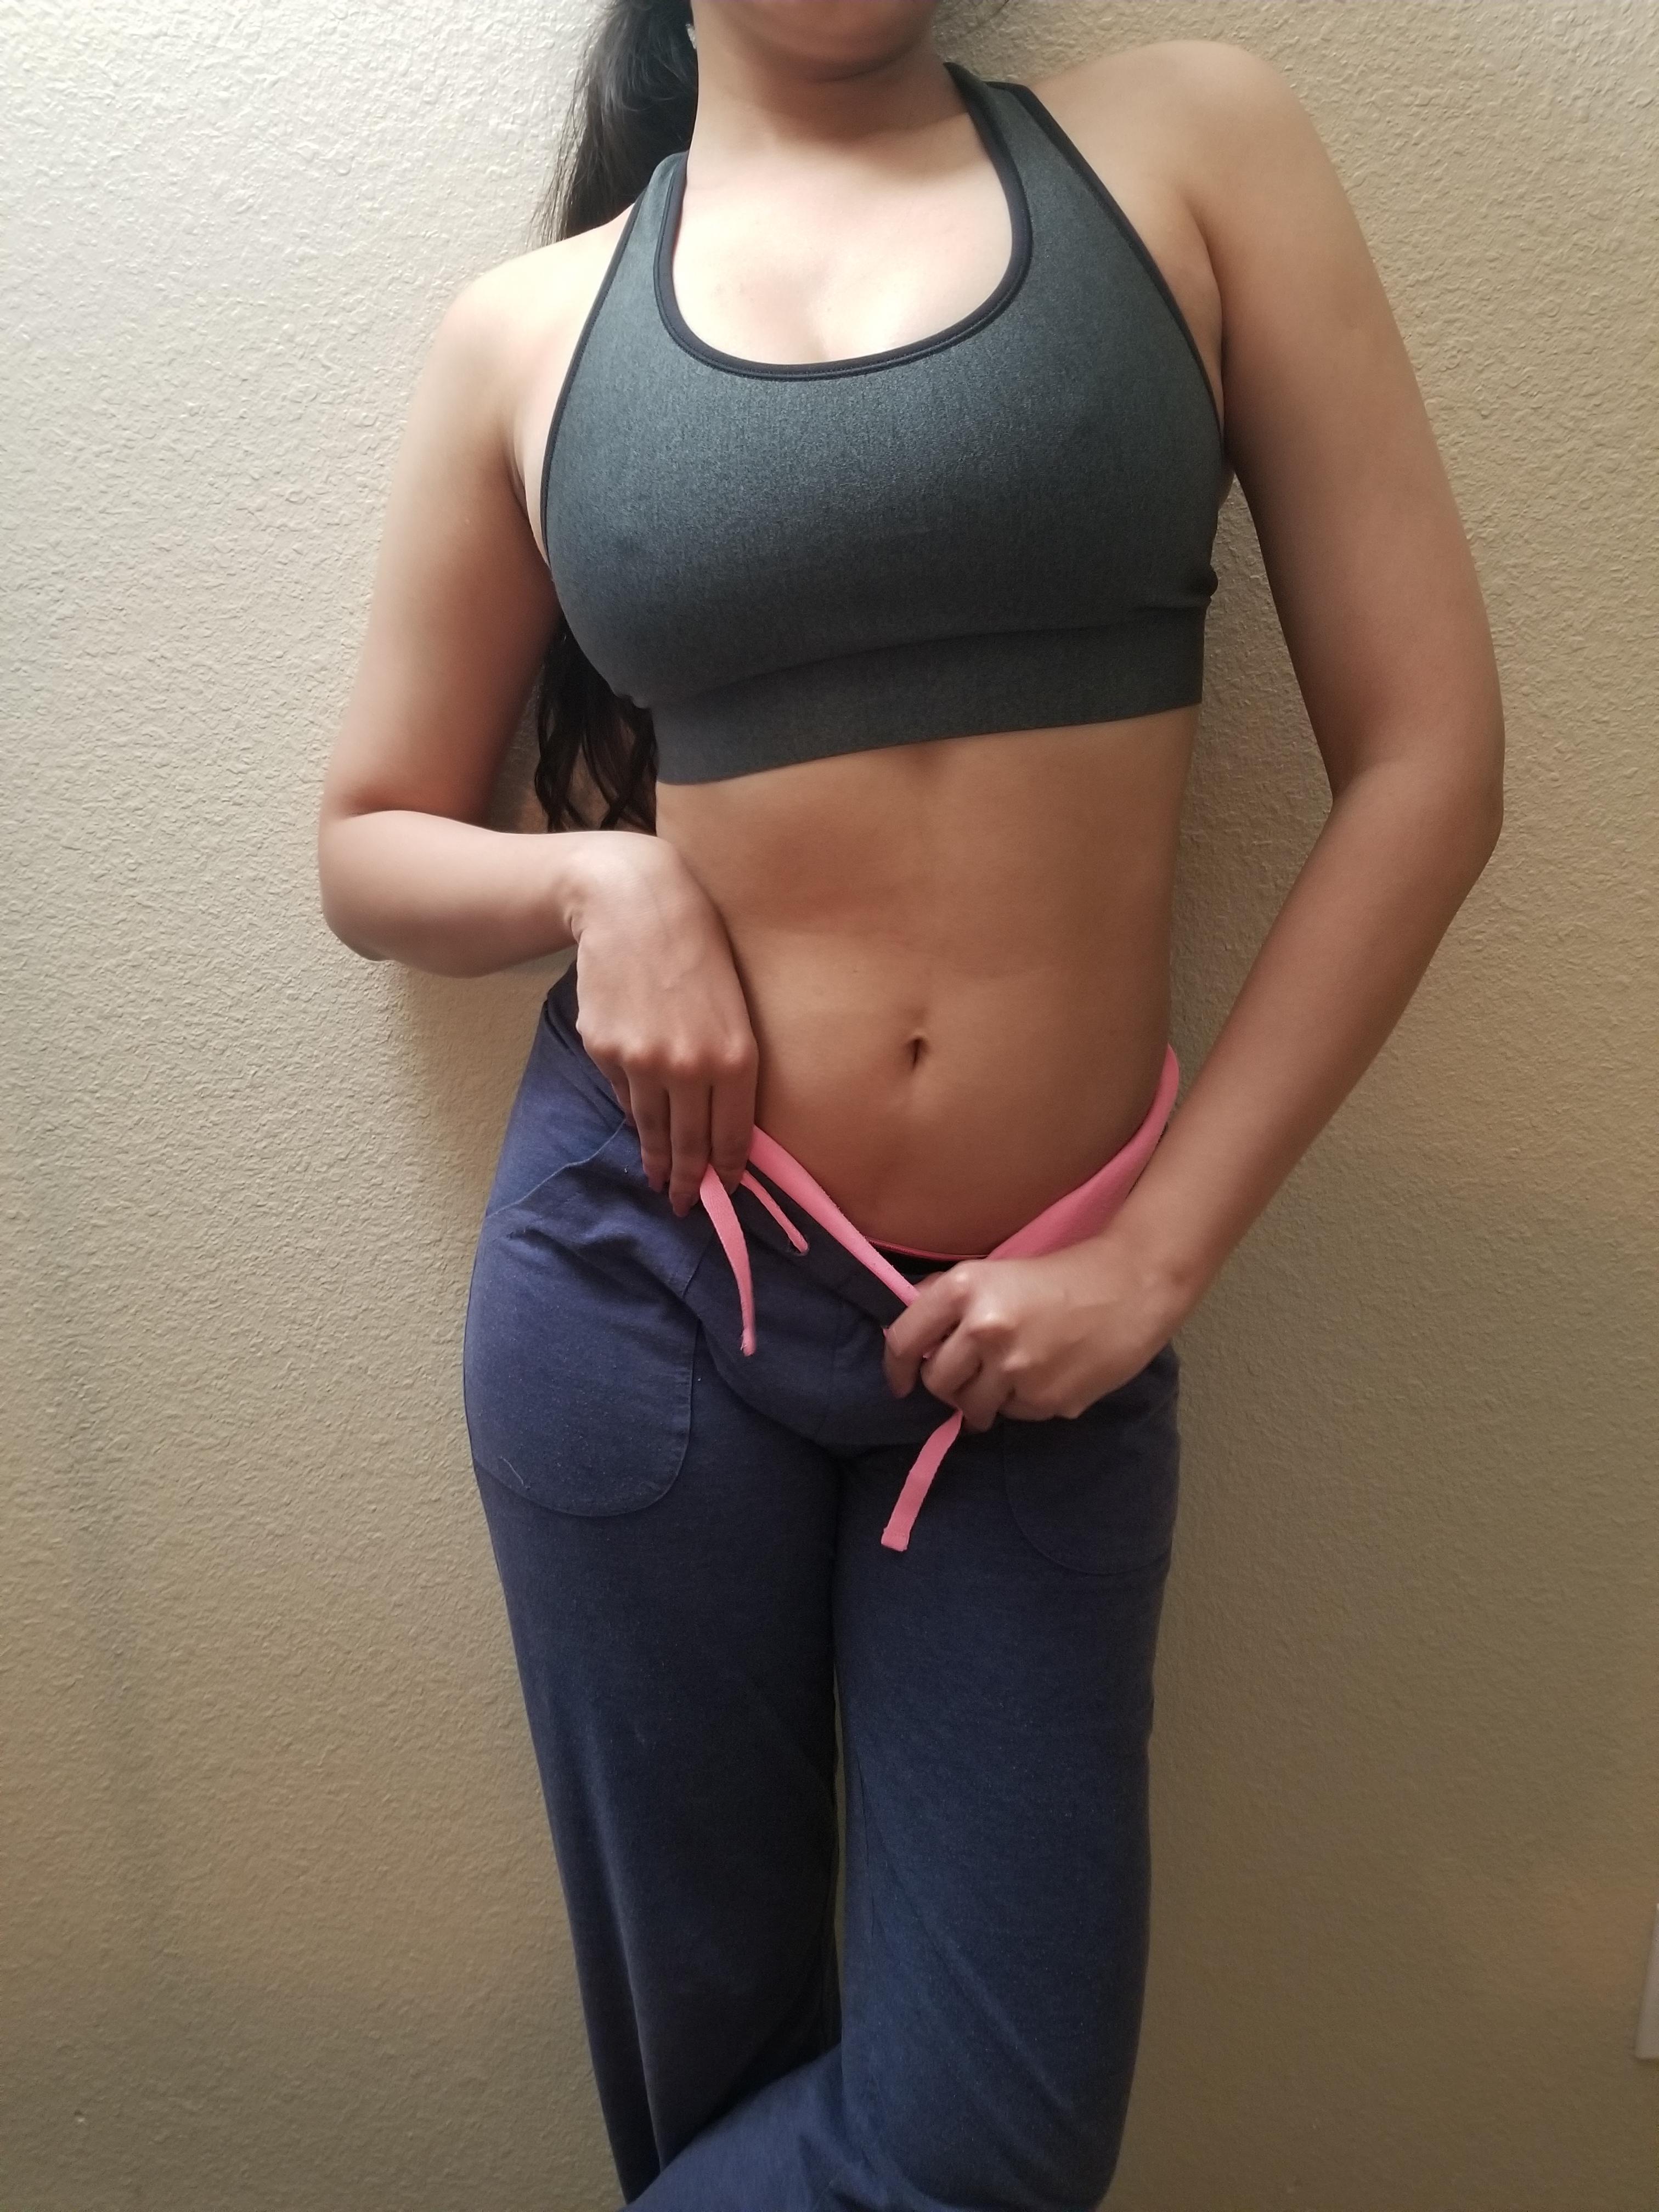 (F) Would you like to help me with my stretches? ?